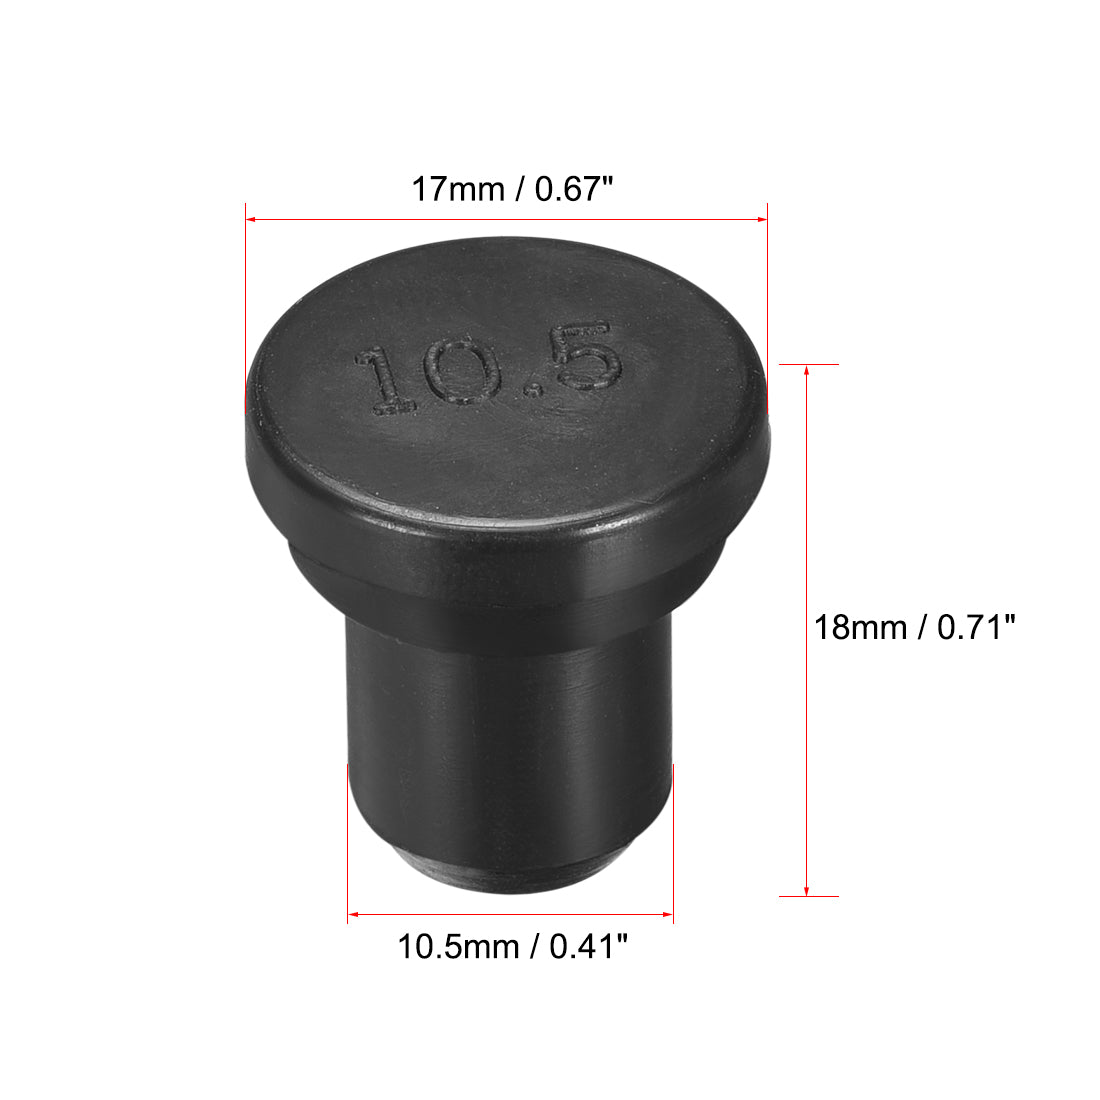 uxcell Uxcell Rubber Stopper , SPR-105 EPDM 10.5mm Dia Seal Hole Insert Stopper Black for Cable Gland , 3pcs